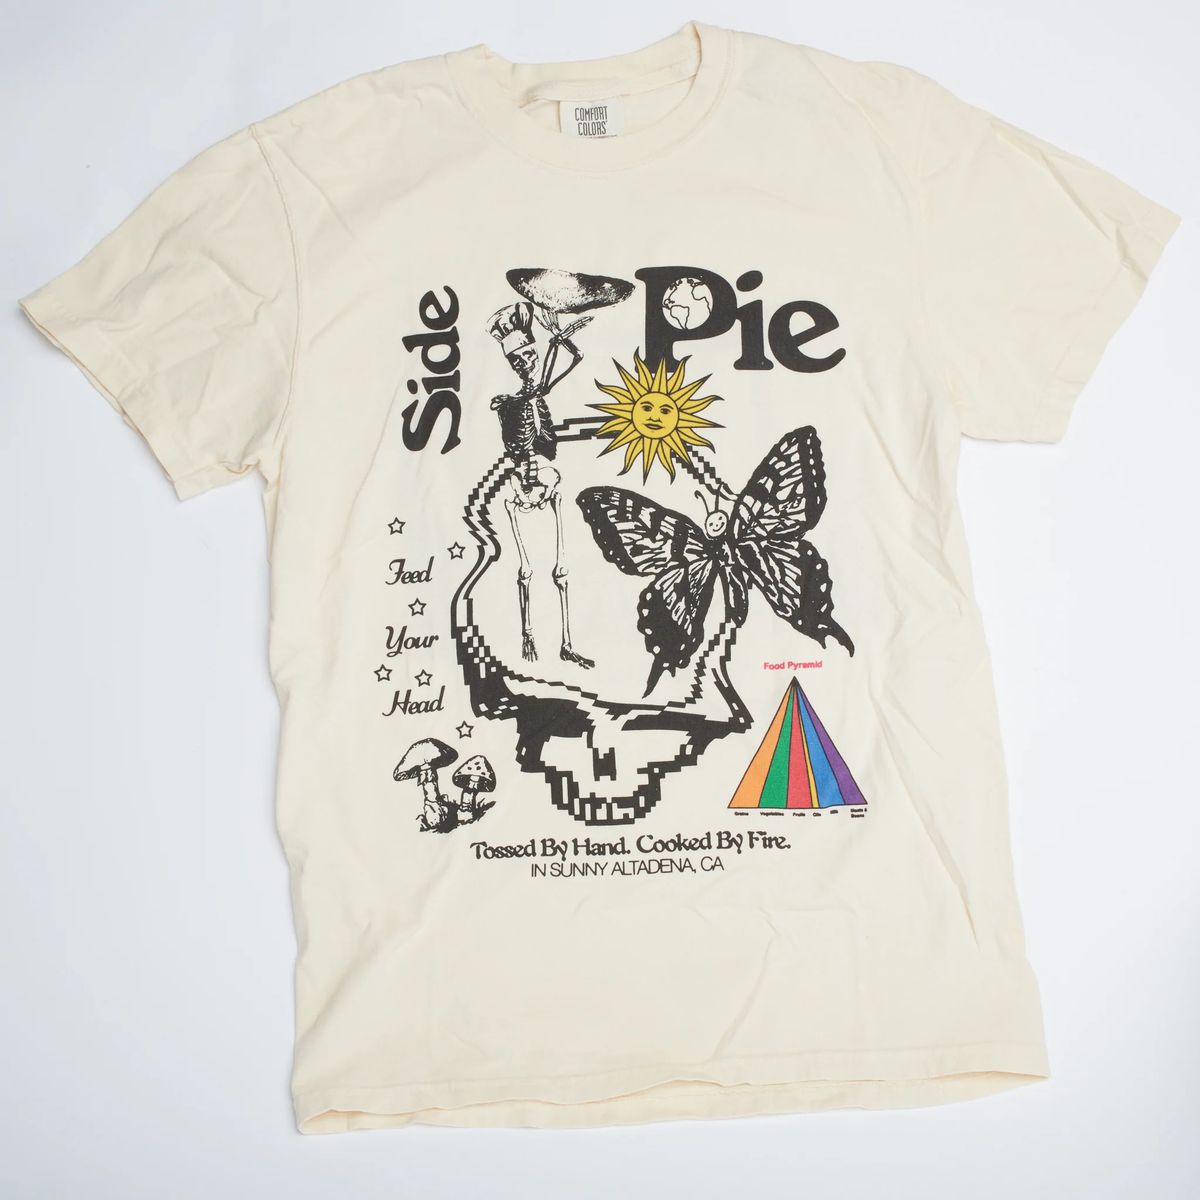 A white t-shirt with a prism, butterfly, yellow sun, and skeleton wearing a chef’s hat.